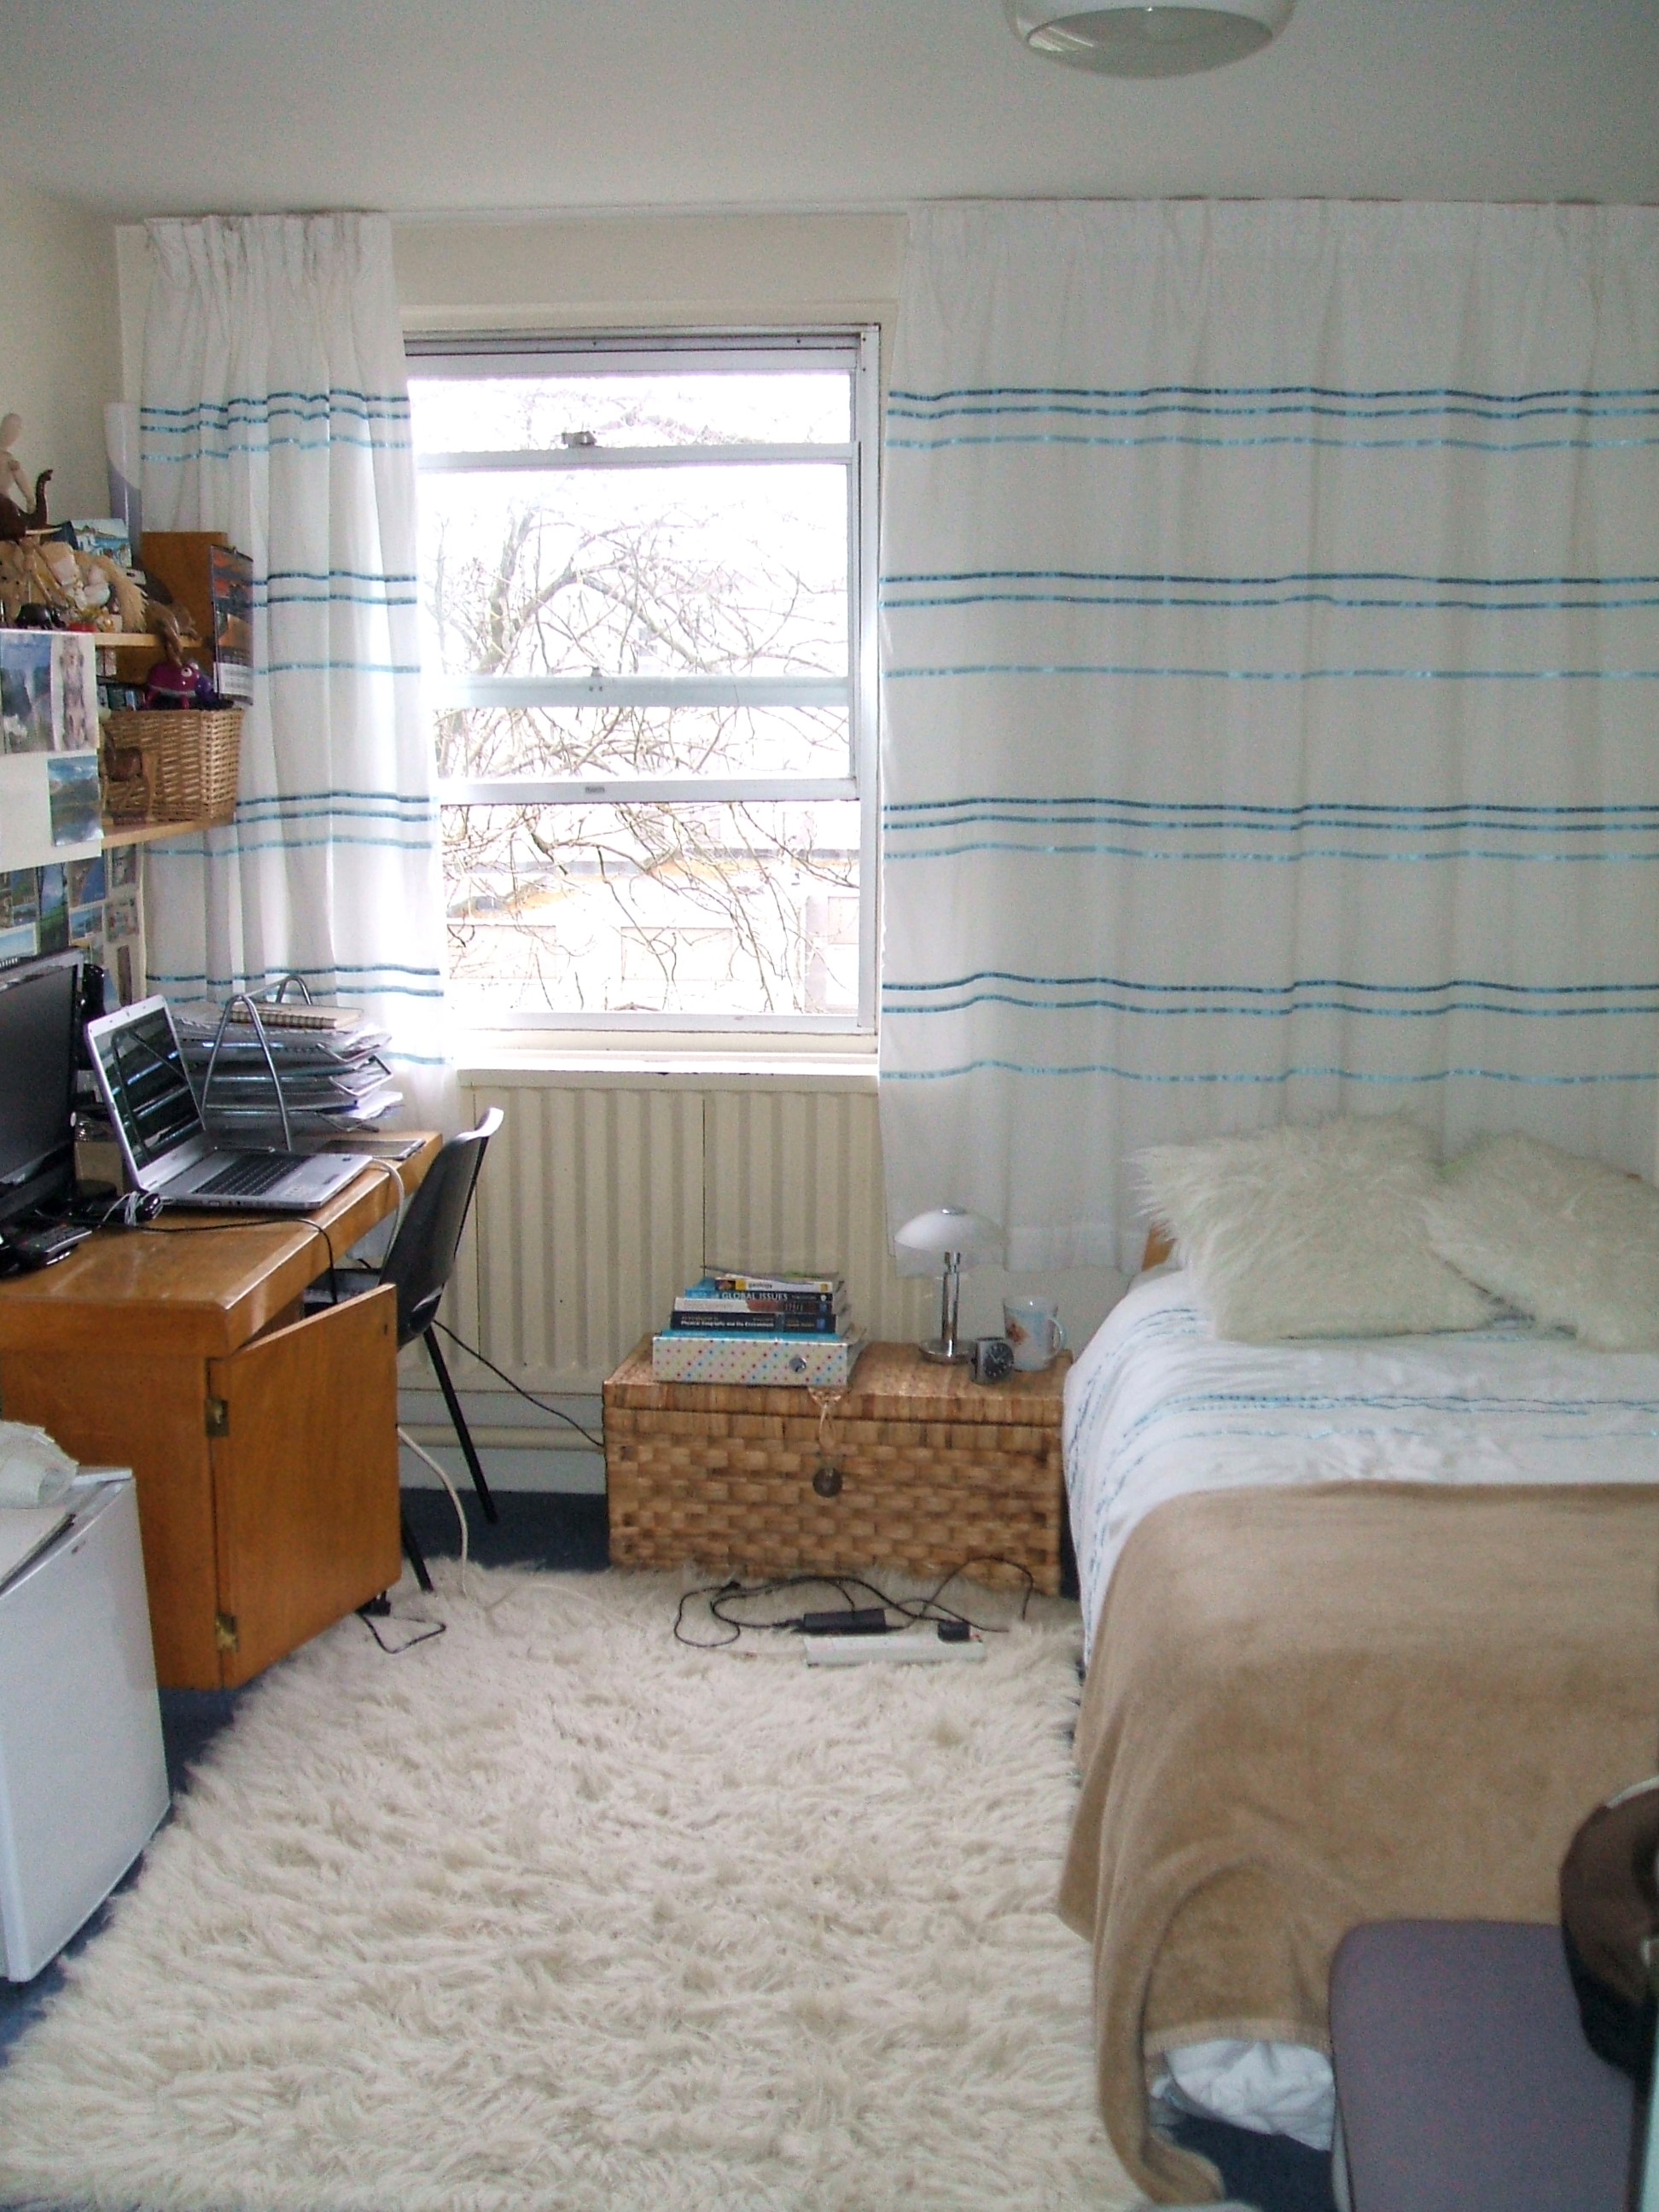 Post pictures of your dorm room! - Page 6 - The Student Room